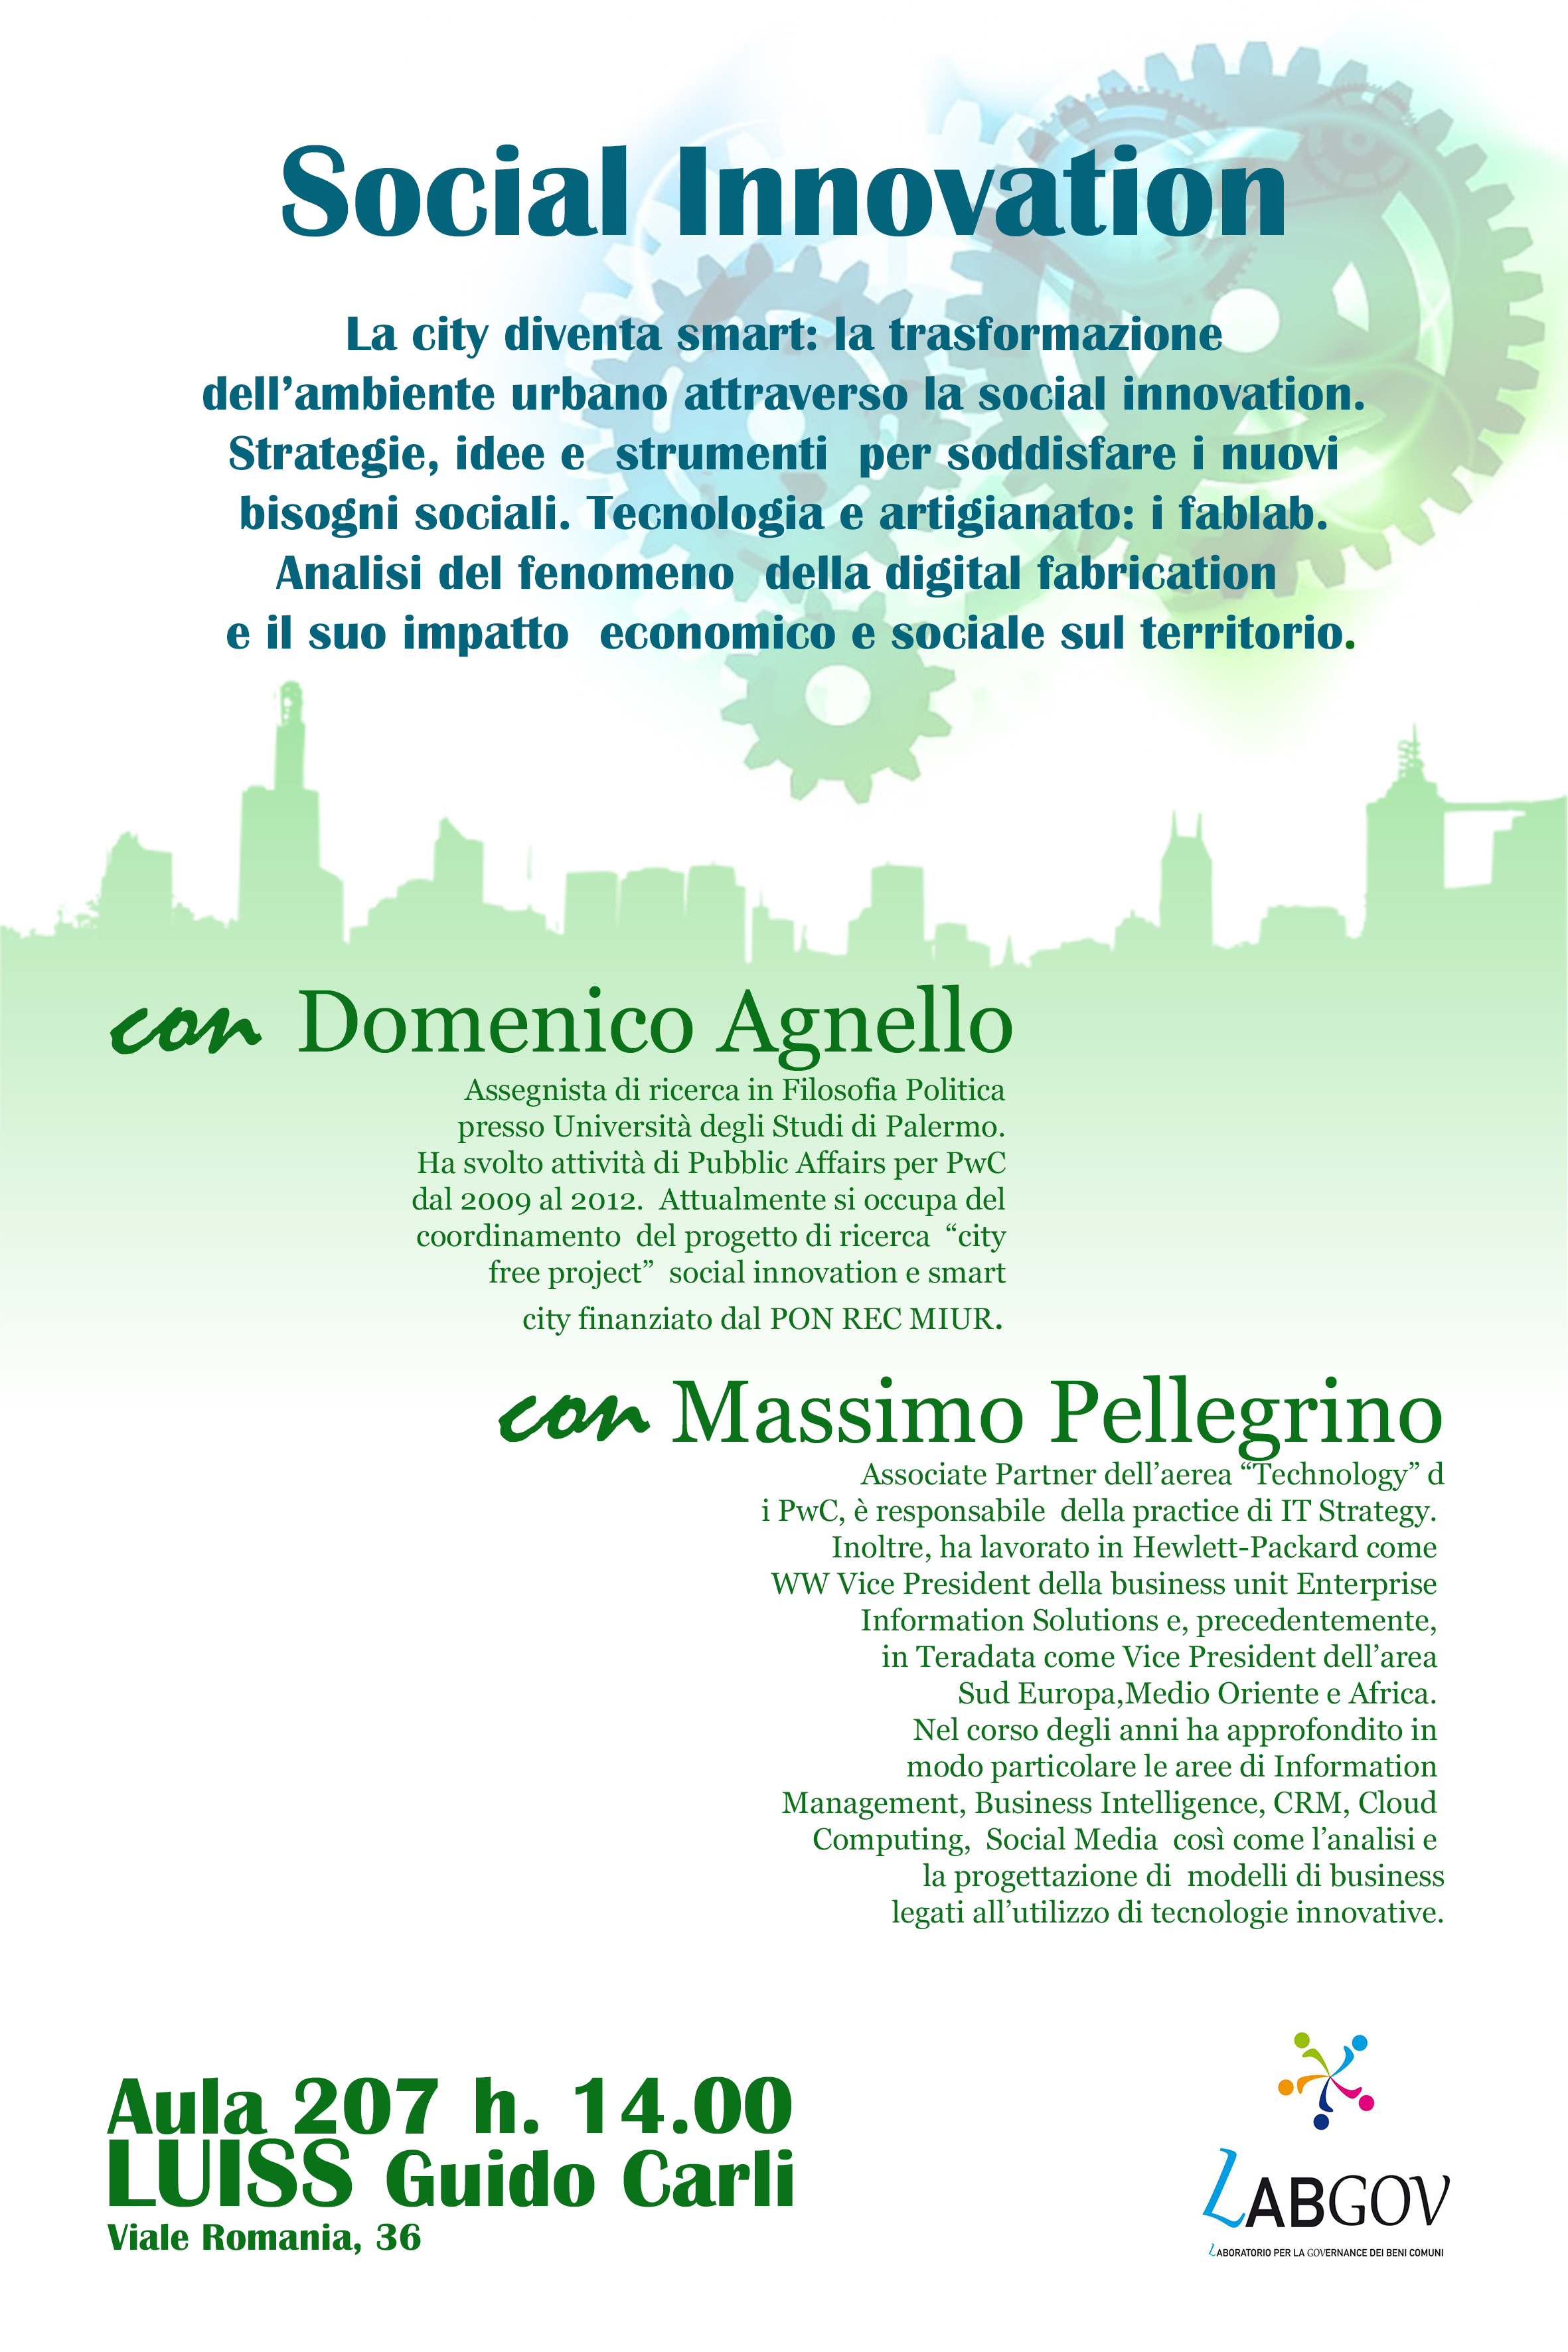 Meeting with D. Agnello and M. Pellegrino – Seminar on Social Innovation